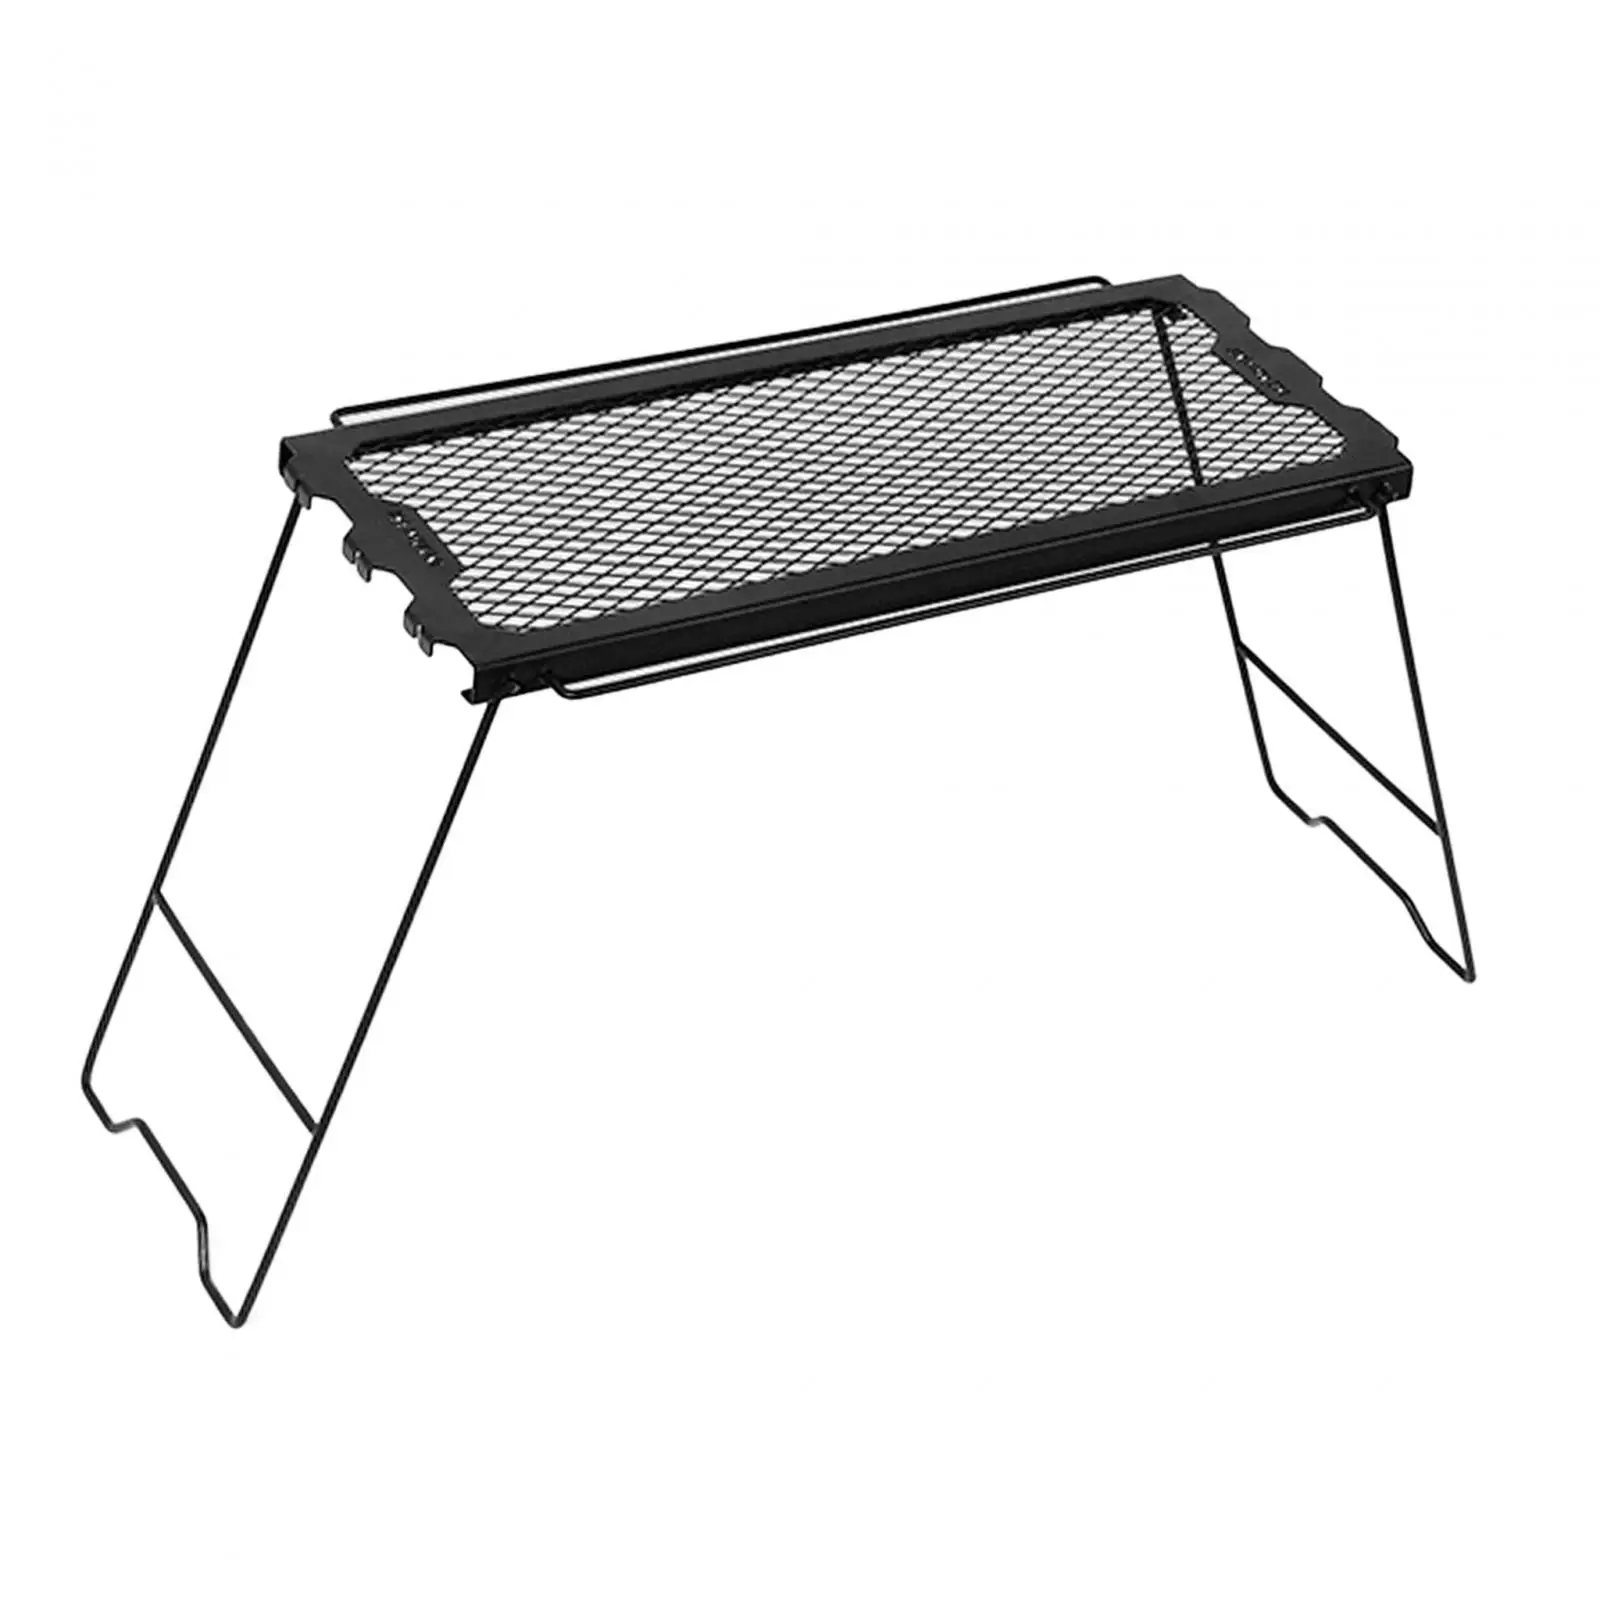 Folding Camping Table Portable Small Table Foldable Campfire Grill Camping Cooking Grate for Patio BBQ Indoor RV Beach